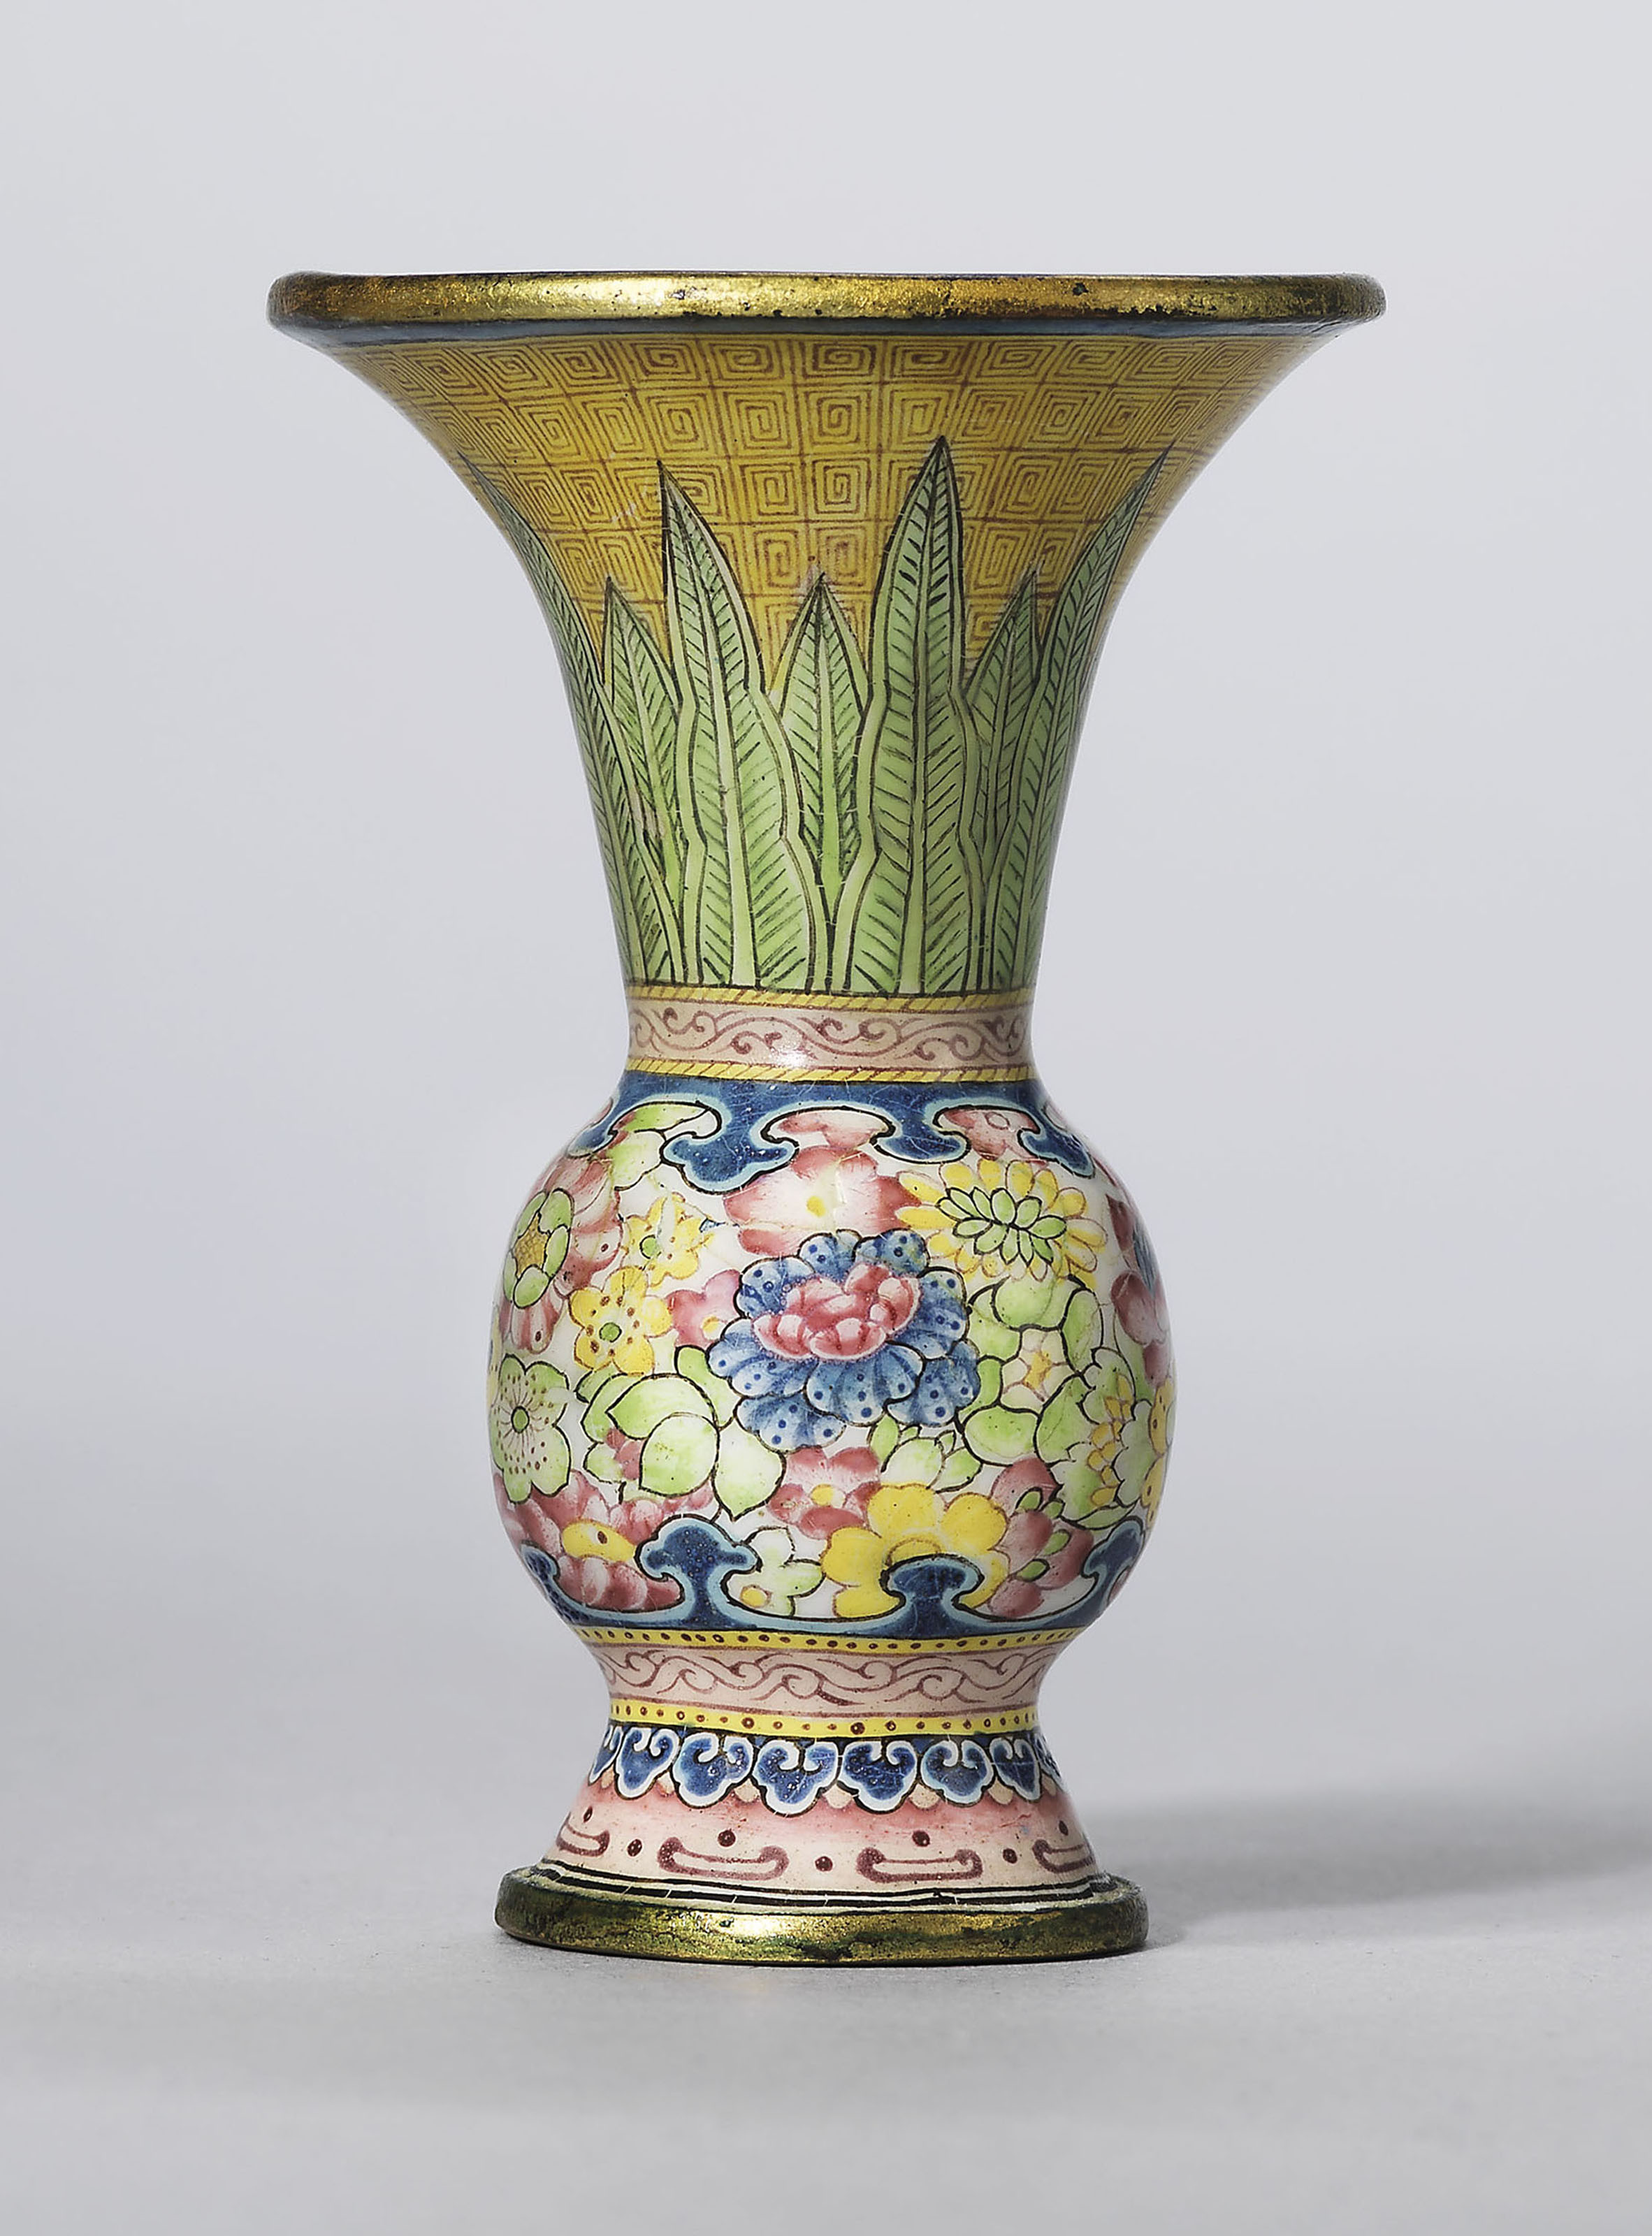 29 Nice Red Glass Vases for Sale 2024 free download red glass vases for sale of a guide to the symbolism of flowers on chinese ceramics christies inside a rare painted enamel gu shaped miniature vase qianlong four character mark in